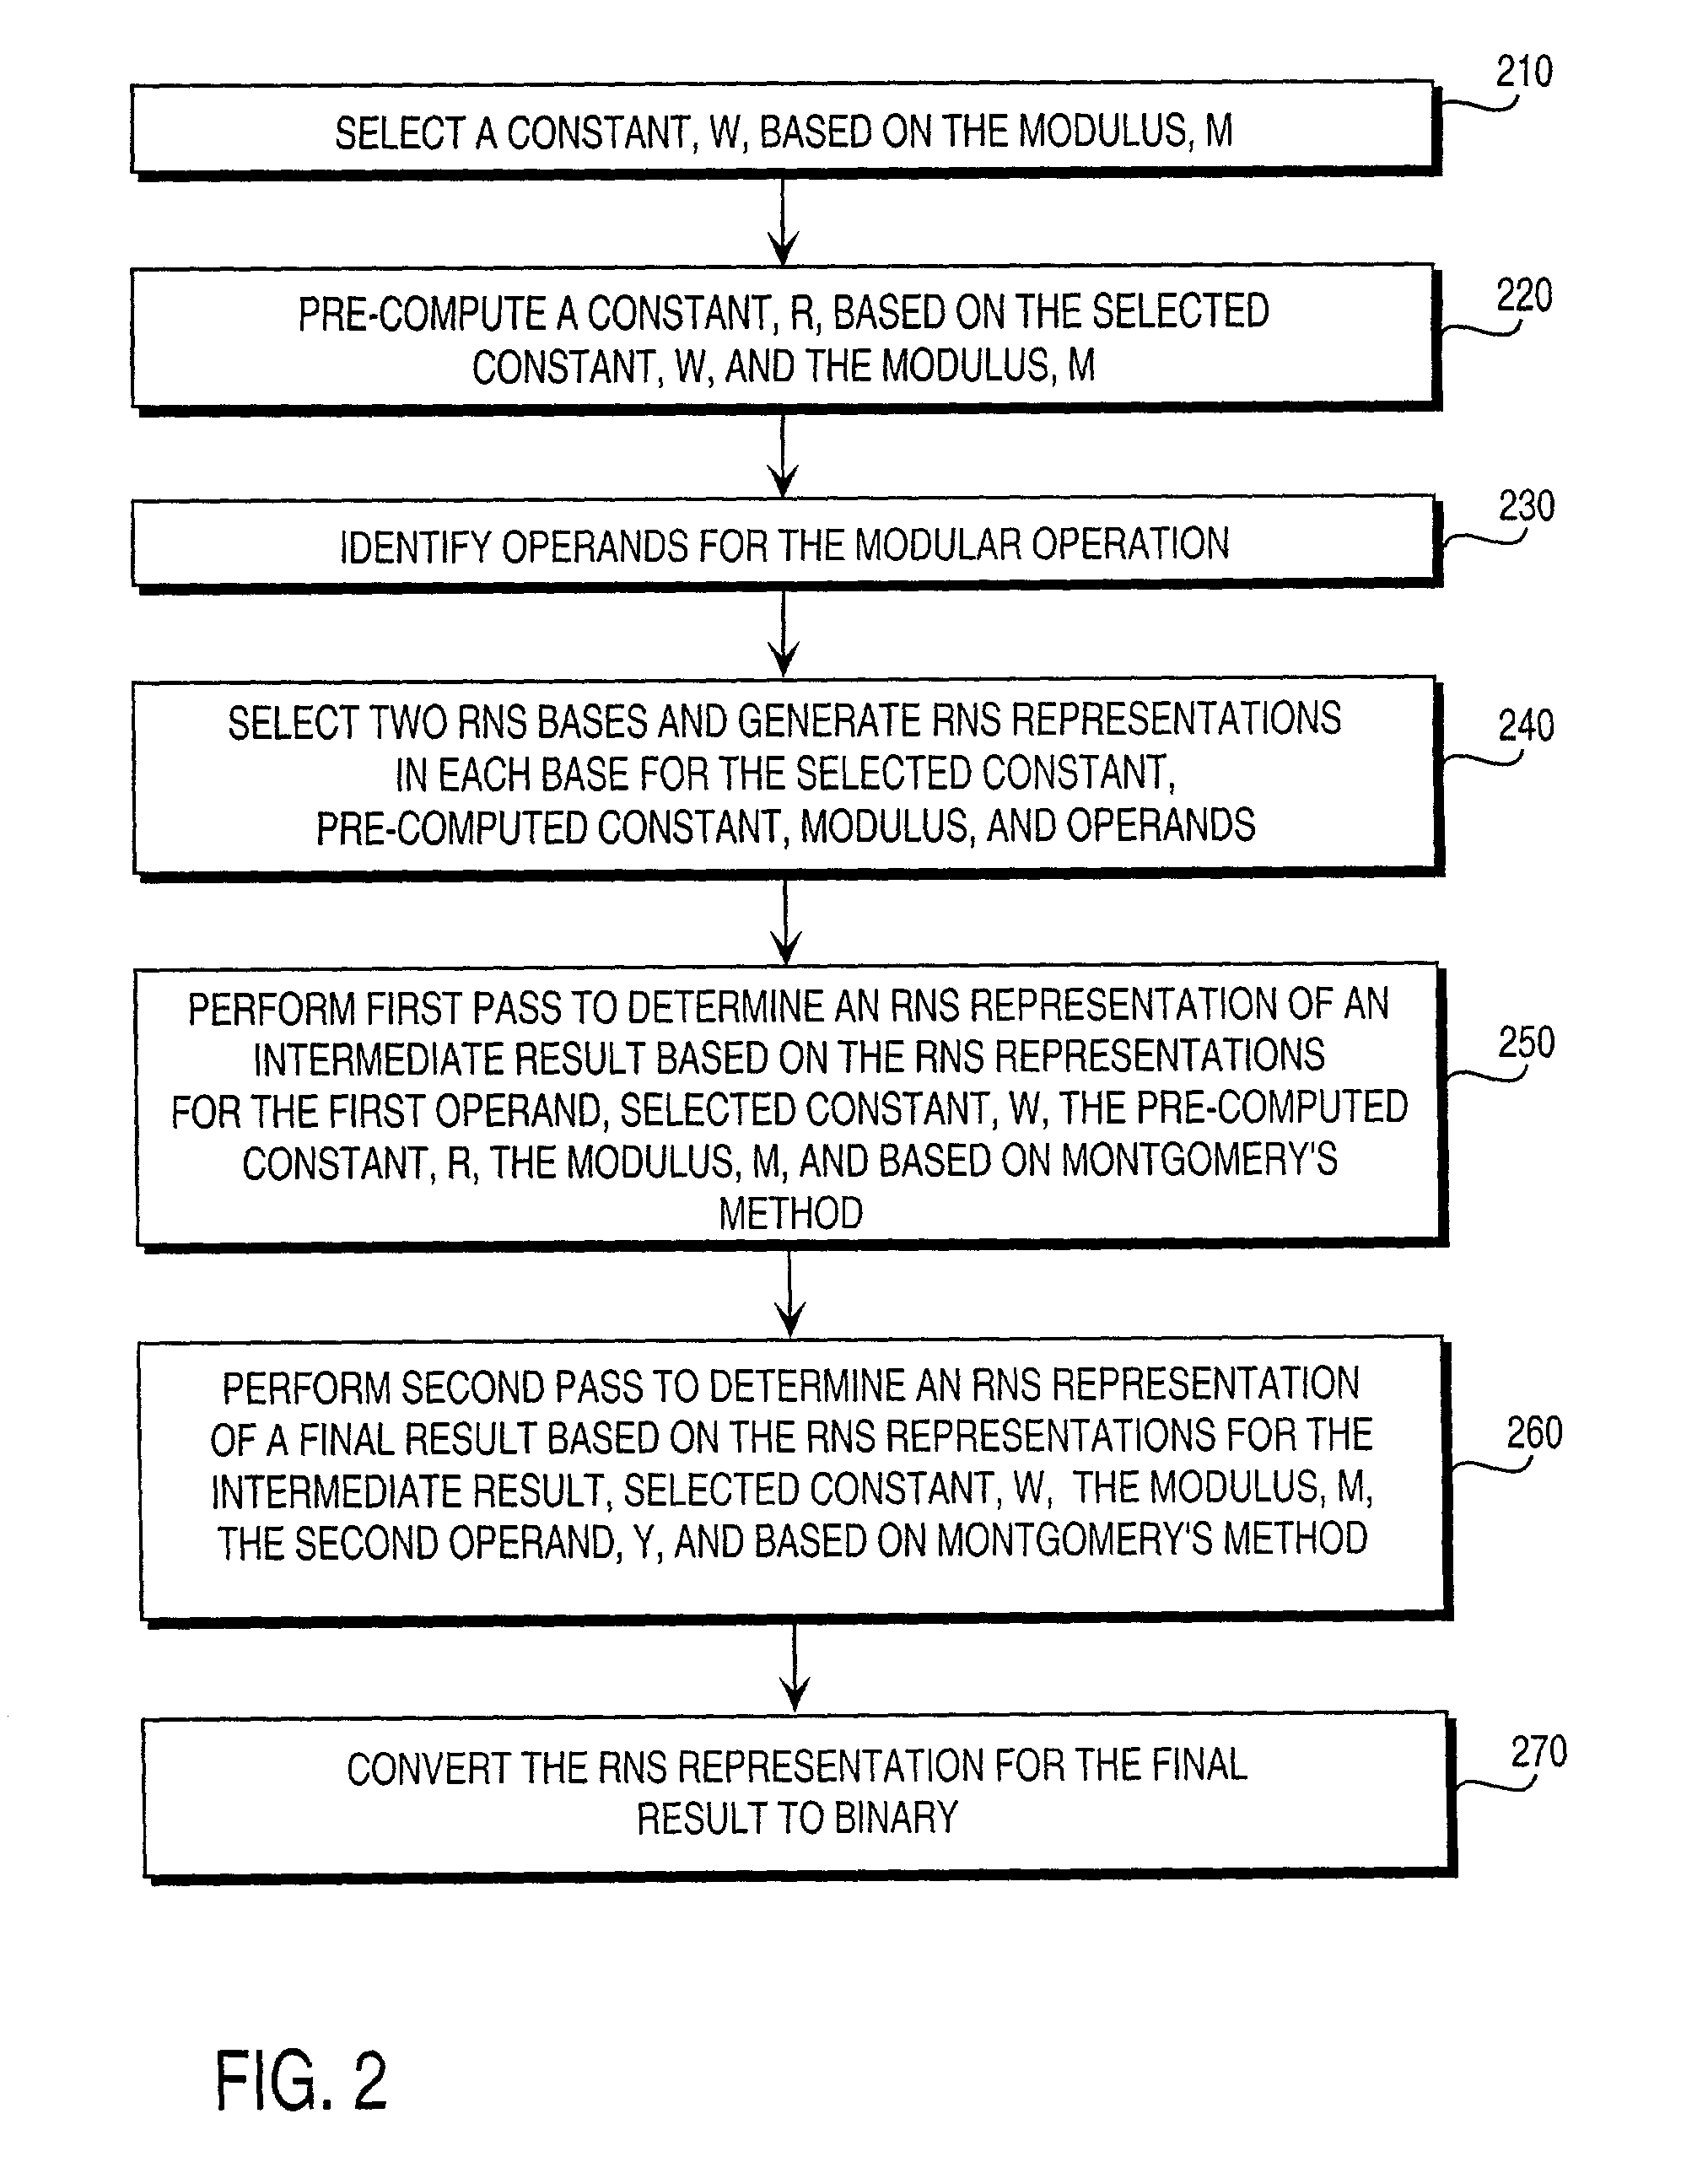 Pre-computation and dual-pass modular arithmetic operation approach to implement encryption protocols efficiently in electronic integrated circuits